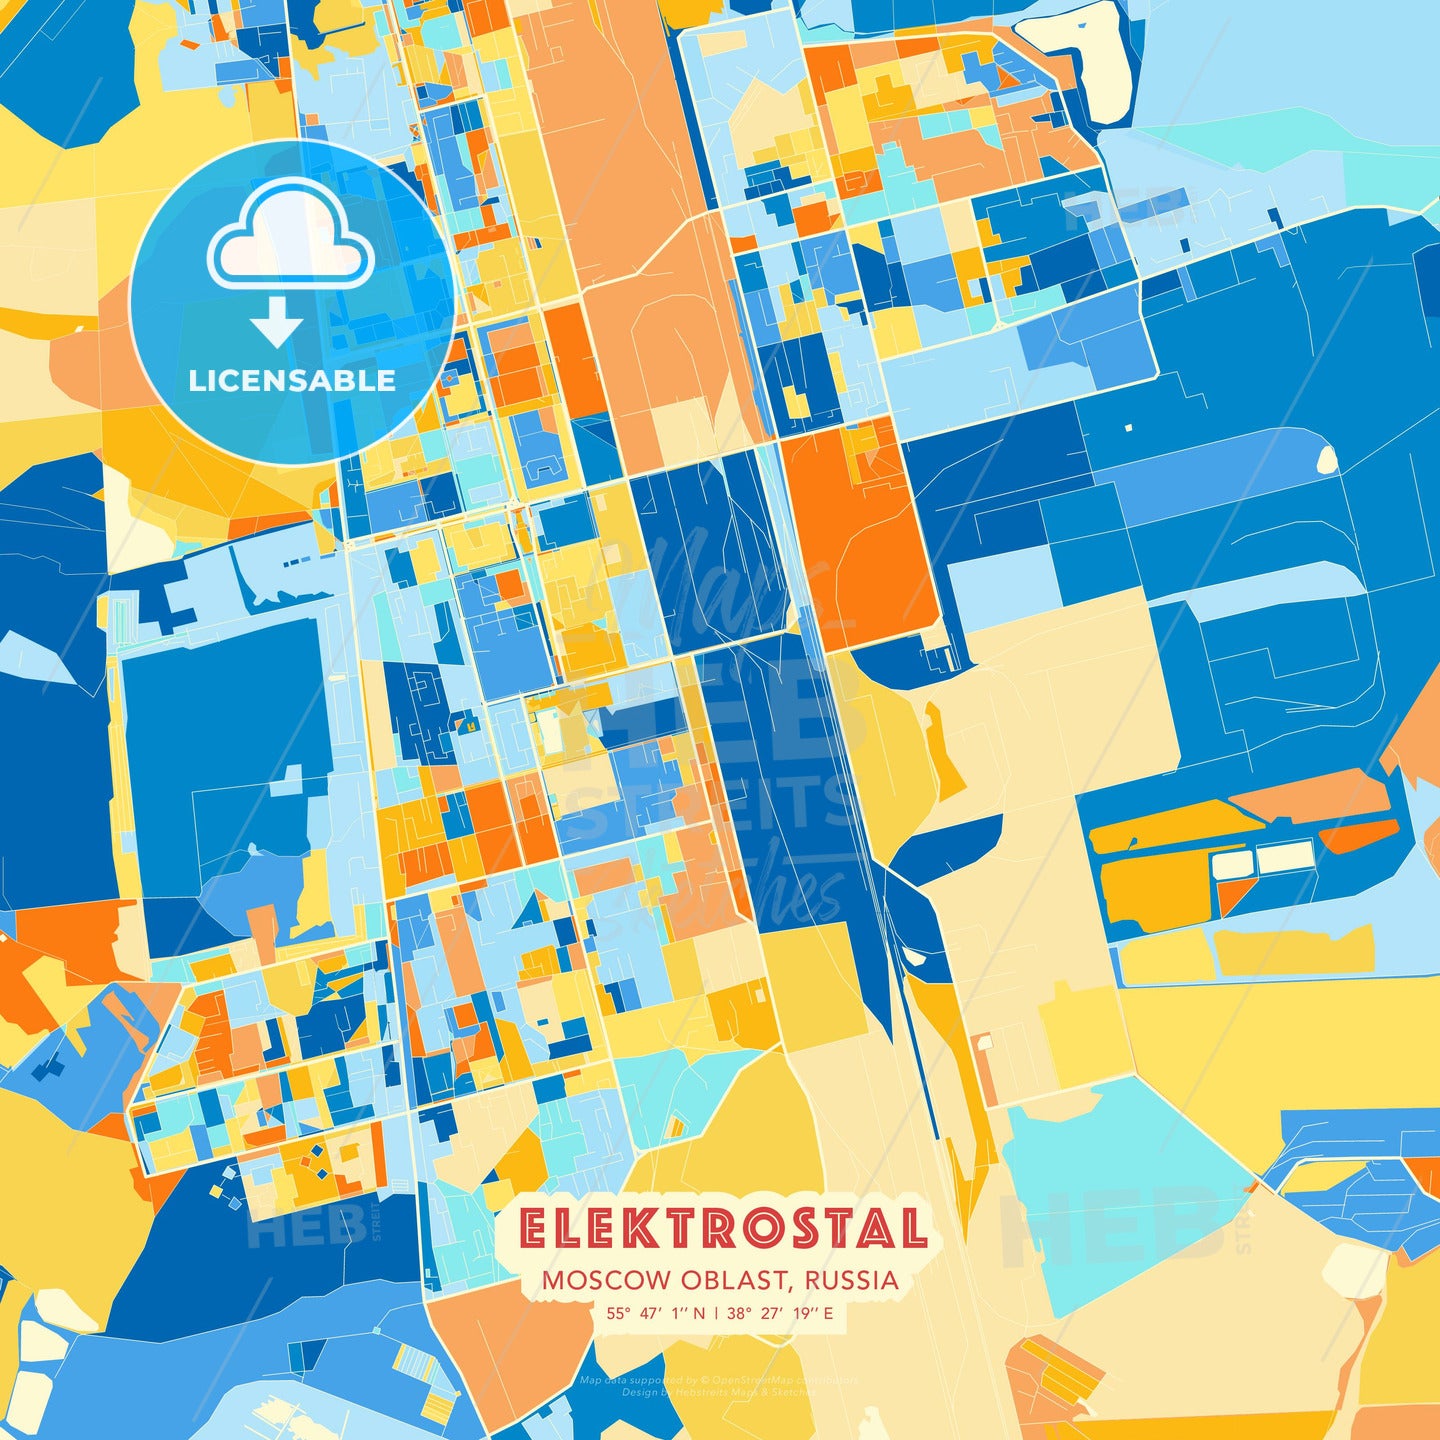 Elektrostal, Moscow Oblast, Russia, map - HEBSTREITS Sketches